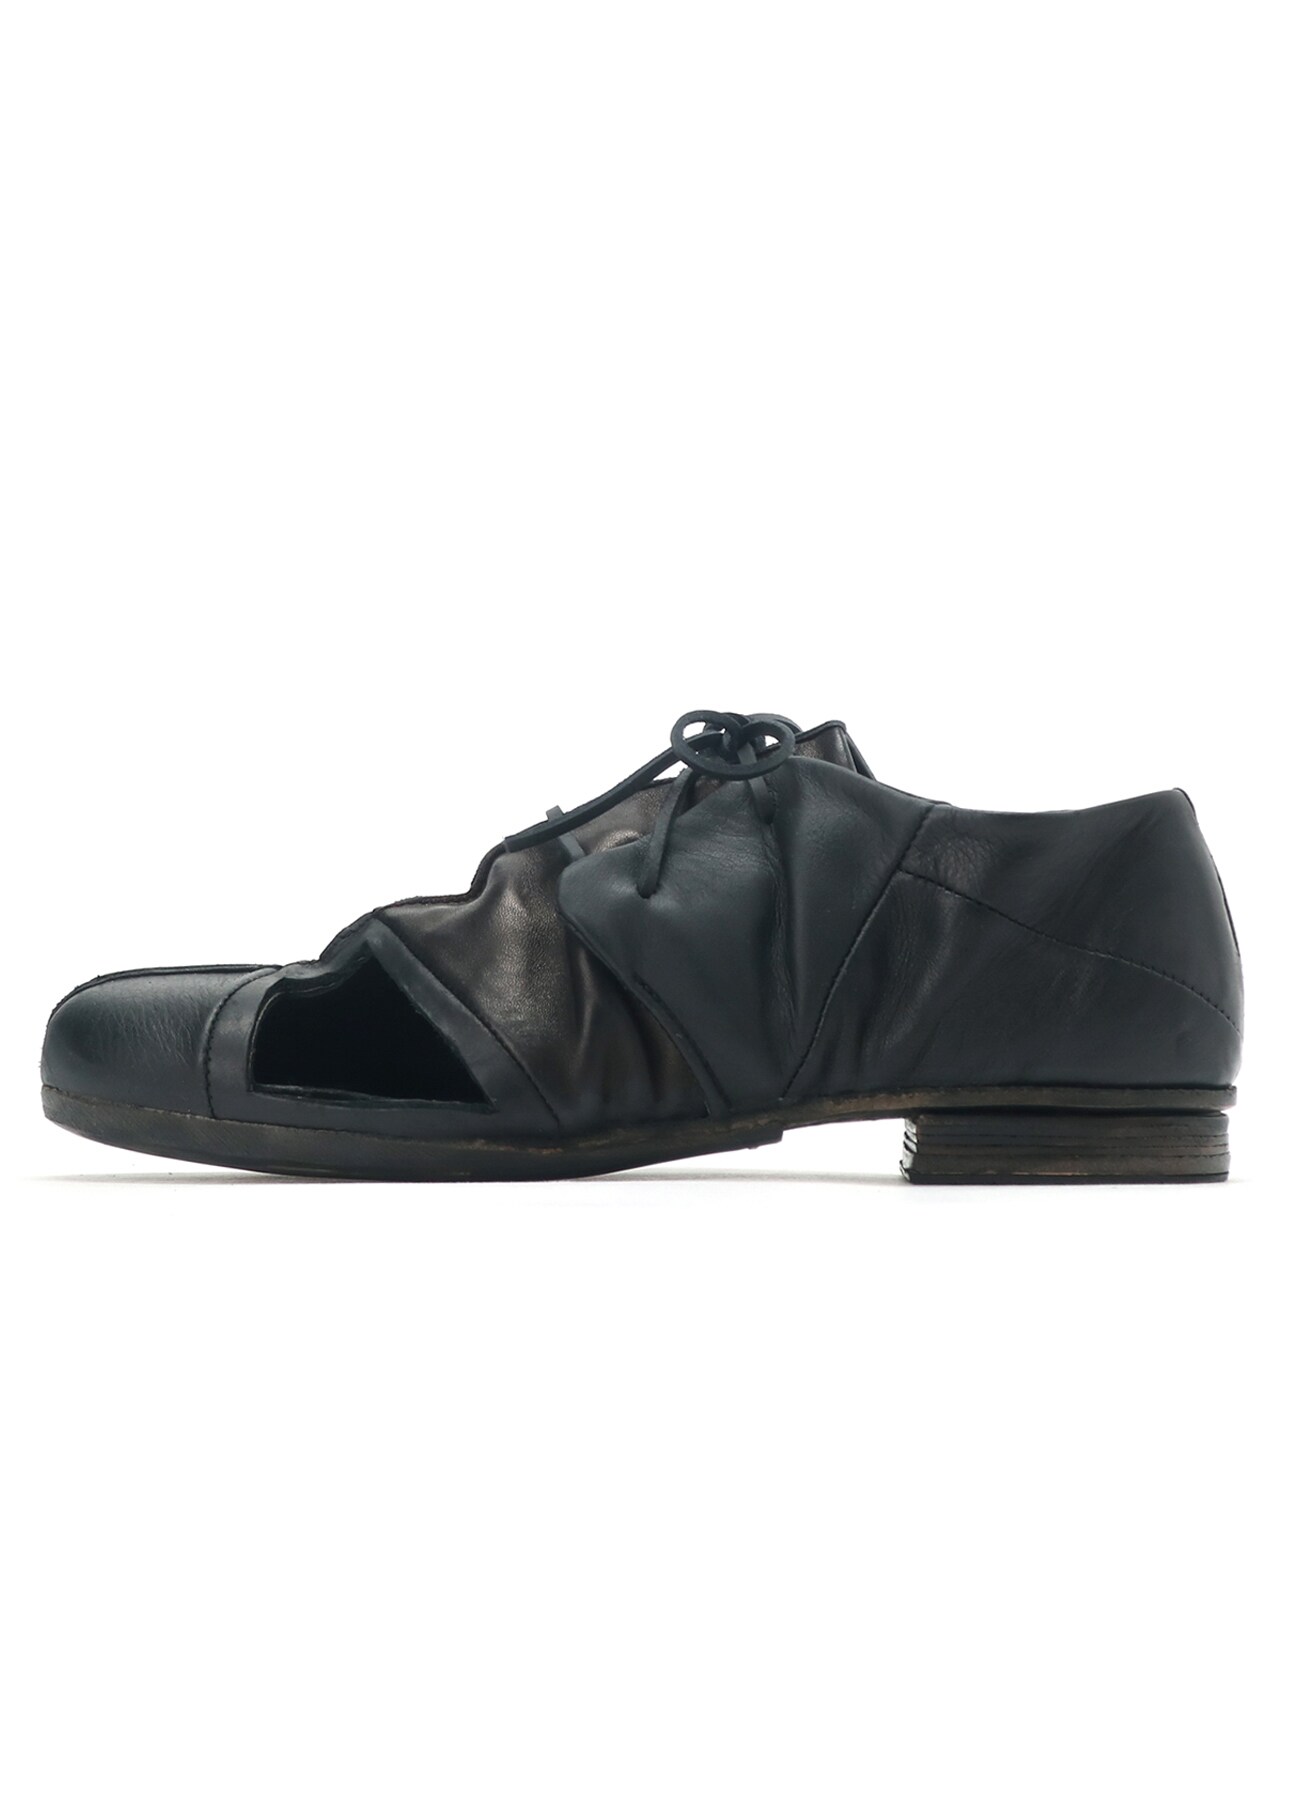 BLACK GOAT LEATHER PATCHWORK SHOES